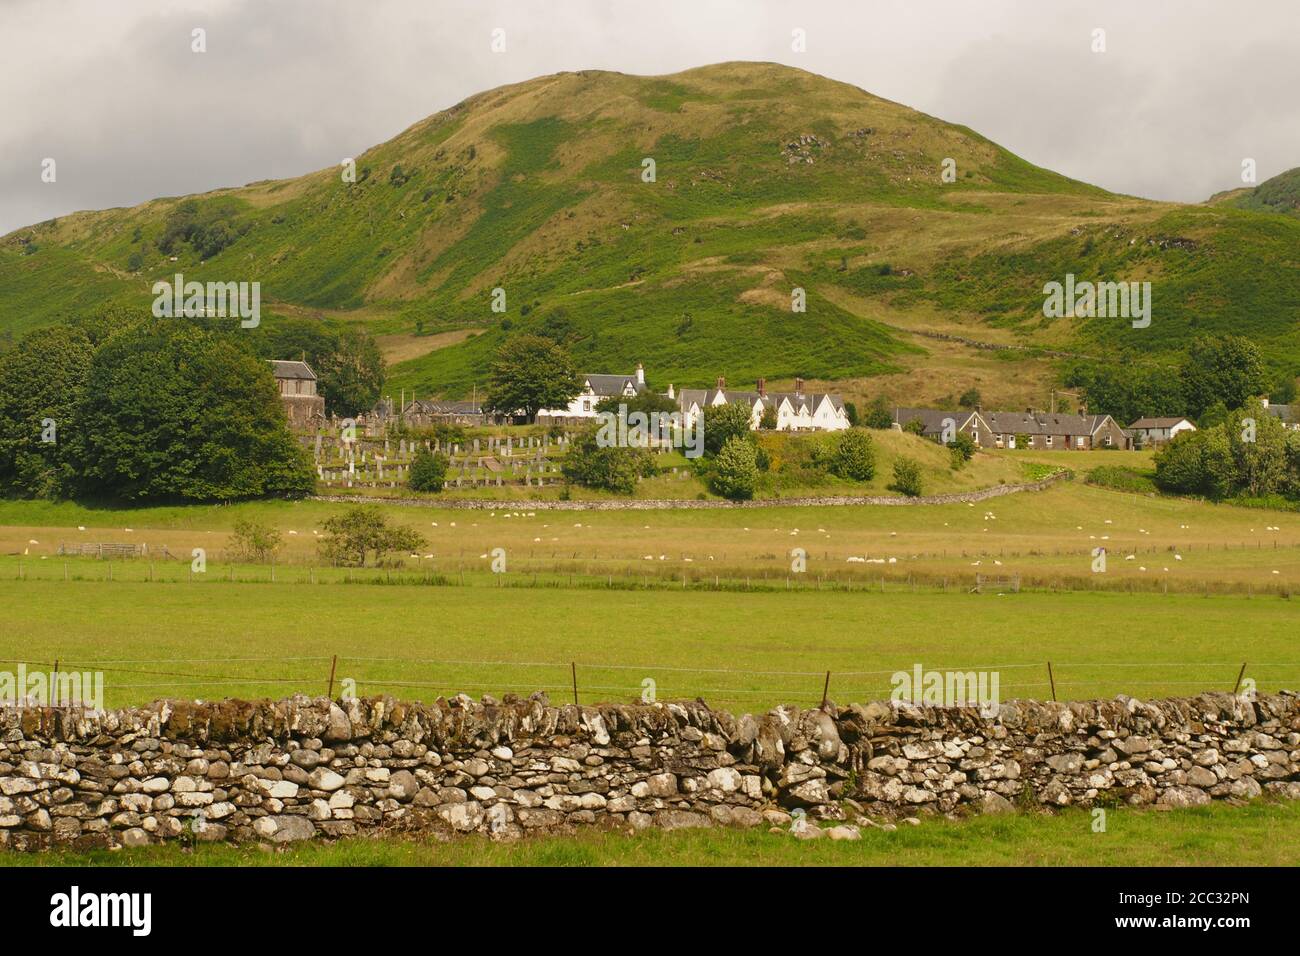 A view of Kilmartin chuch, hotel and houses from Kilmartin Glen with Barr Mor rising up behind and a dry stone wall in the foreground Stock Photo